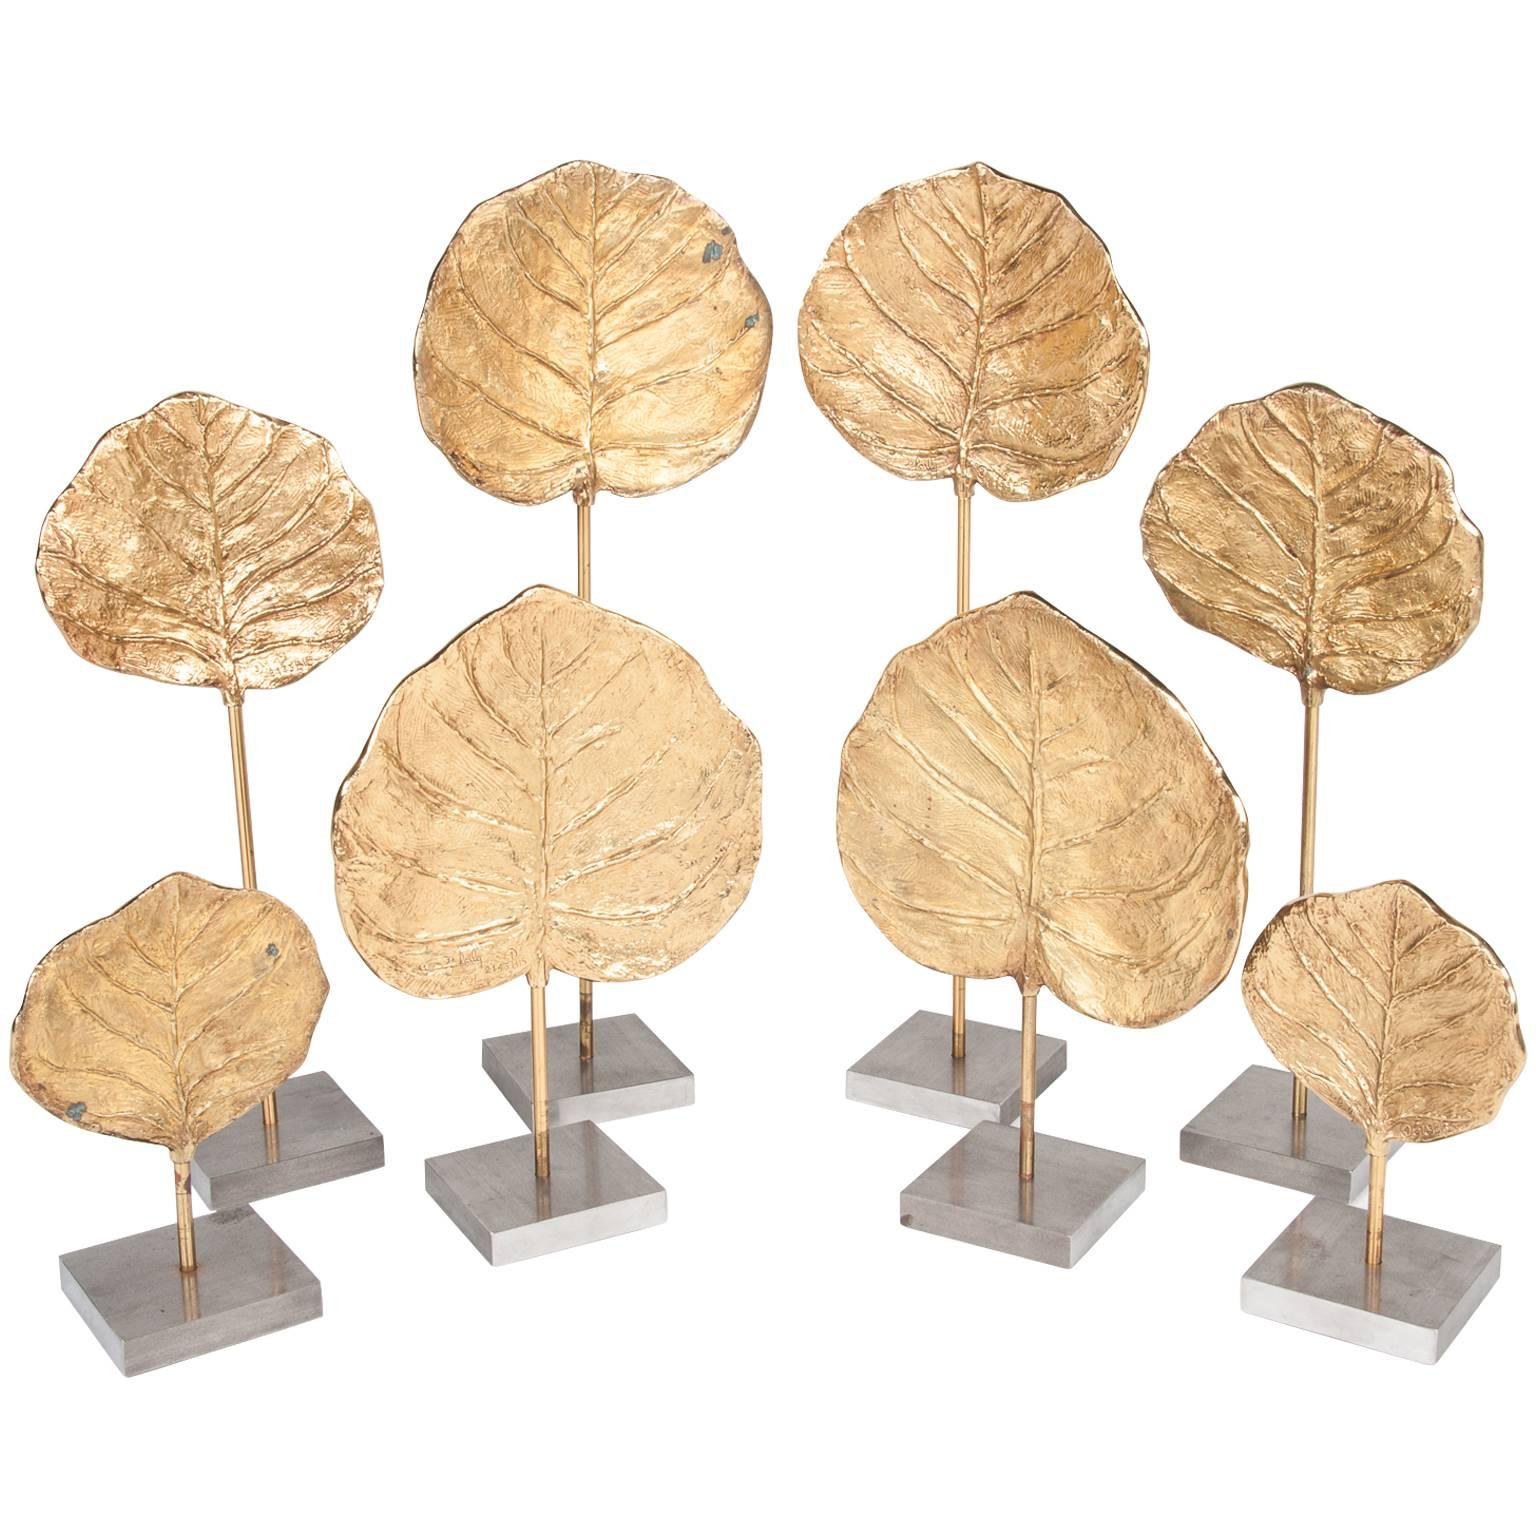 Eight Gilt Bronze Leaf Castings by Chrystaine Charles for Maison Charles